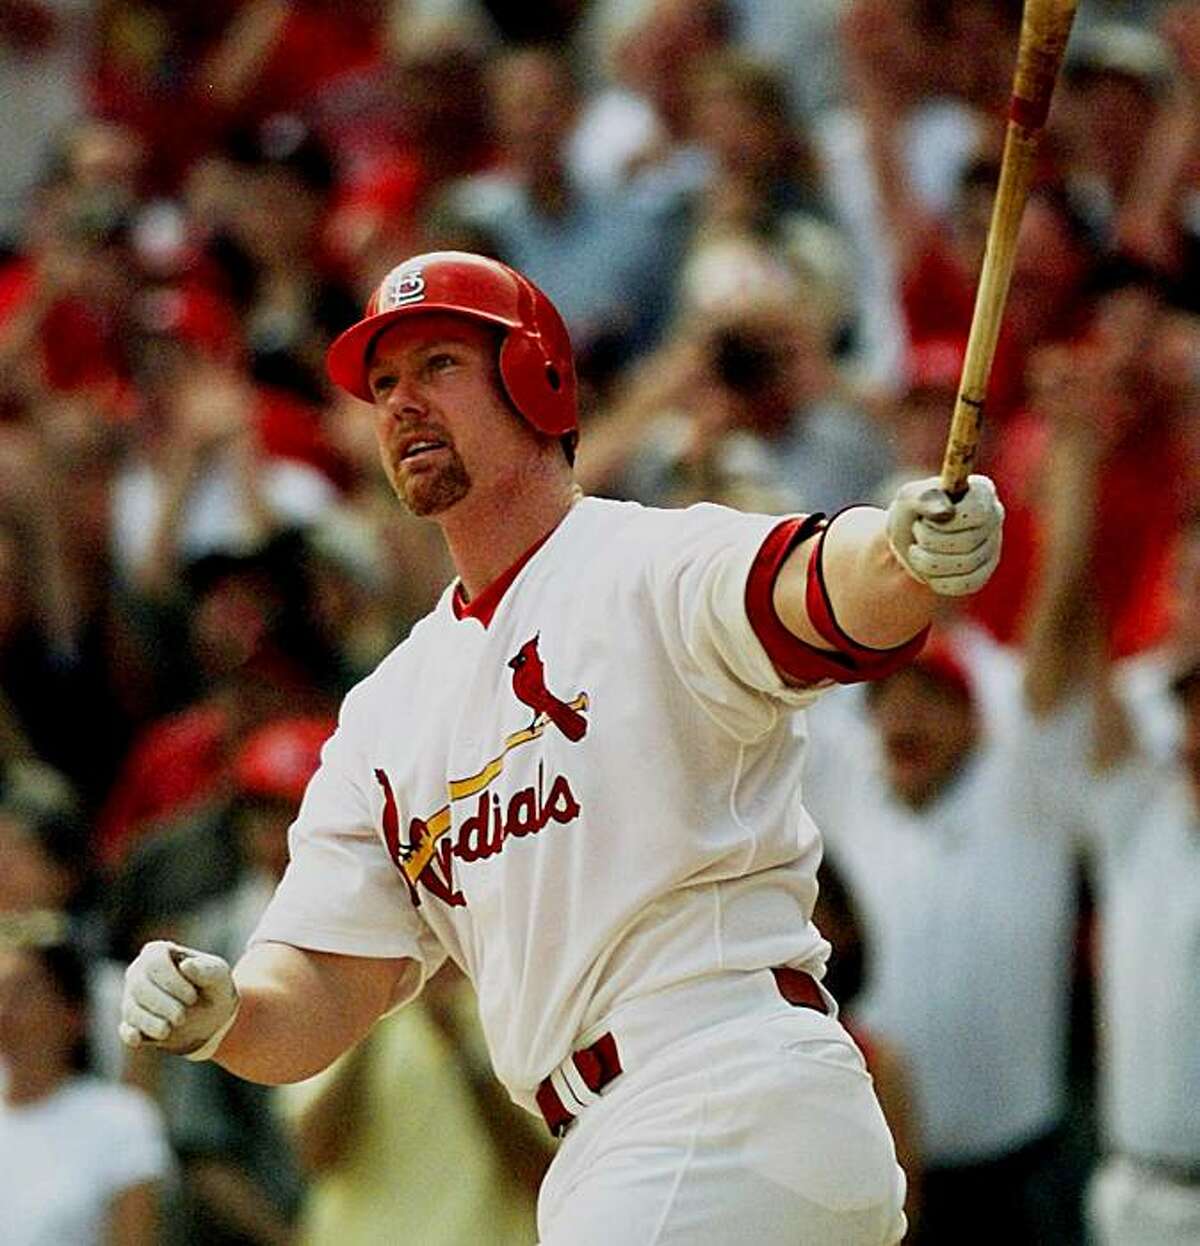 27, 1998 file photo showing St. Louis Cardinals' Mark McGwire watching...